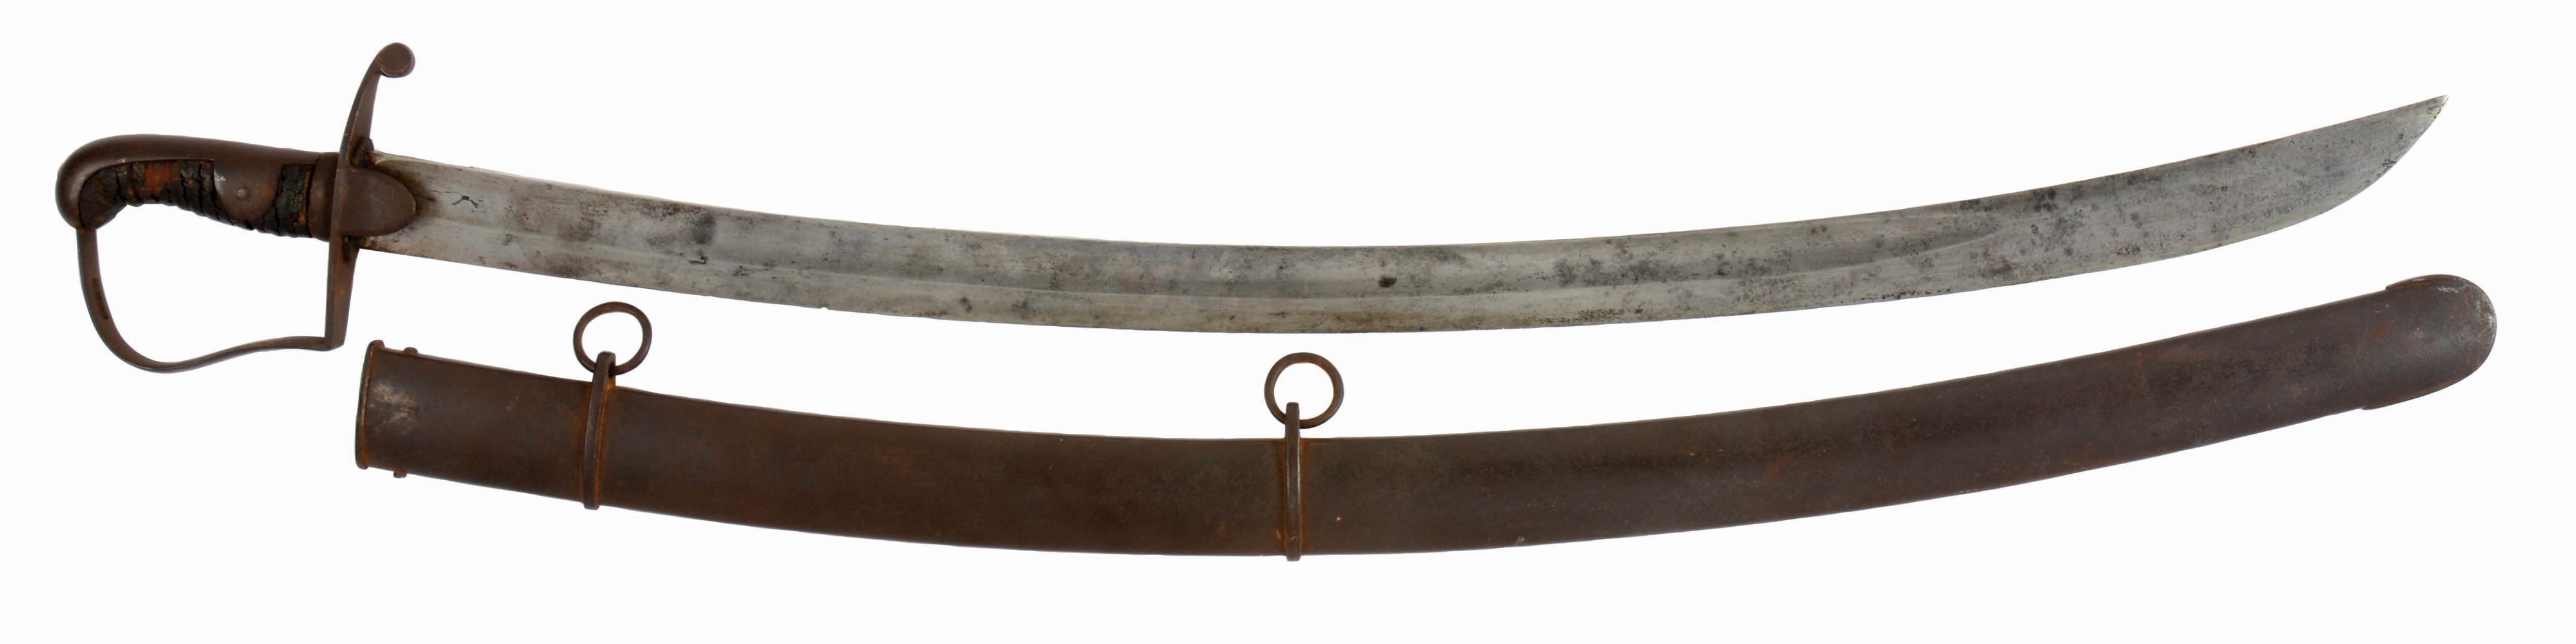 SCARCE IMPORTED CAVALRY SABER RETAILER MARKED TO WOLFE OF NEW YORK, WITH SCABBARD.